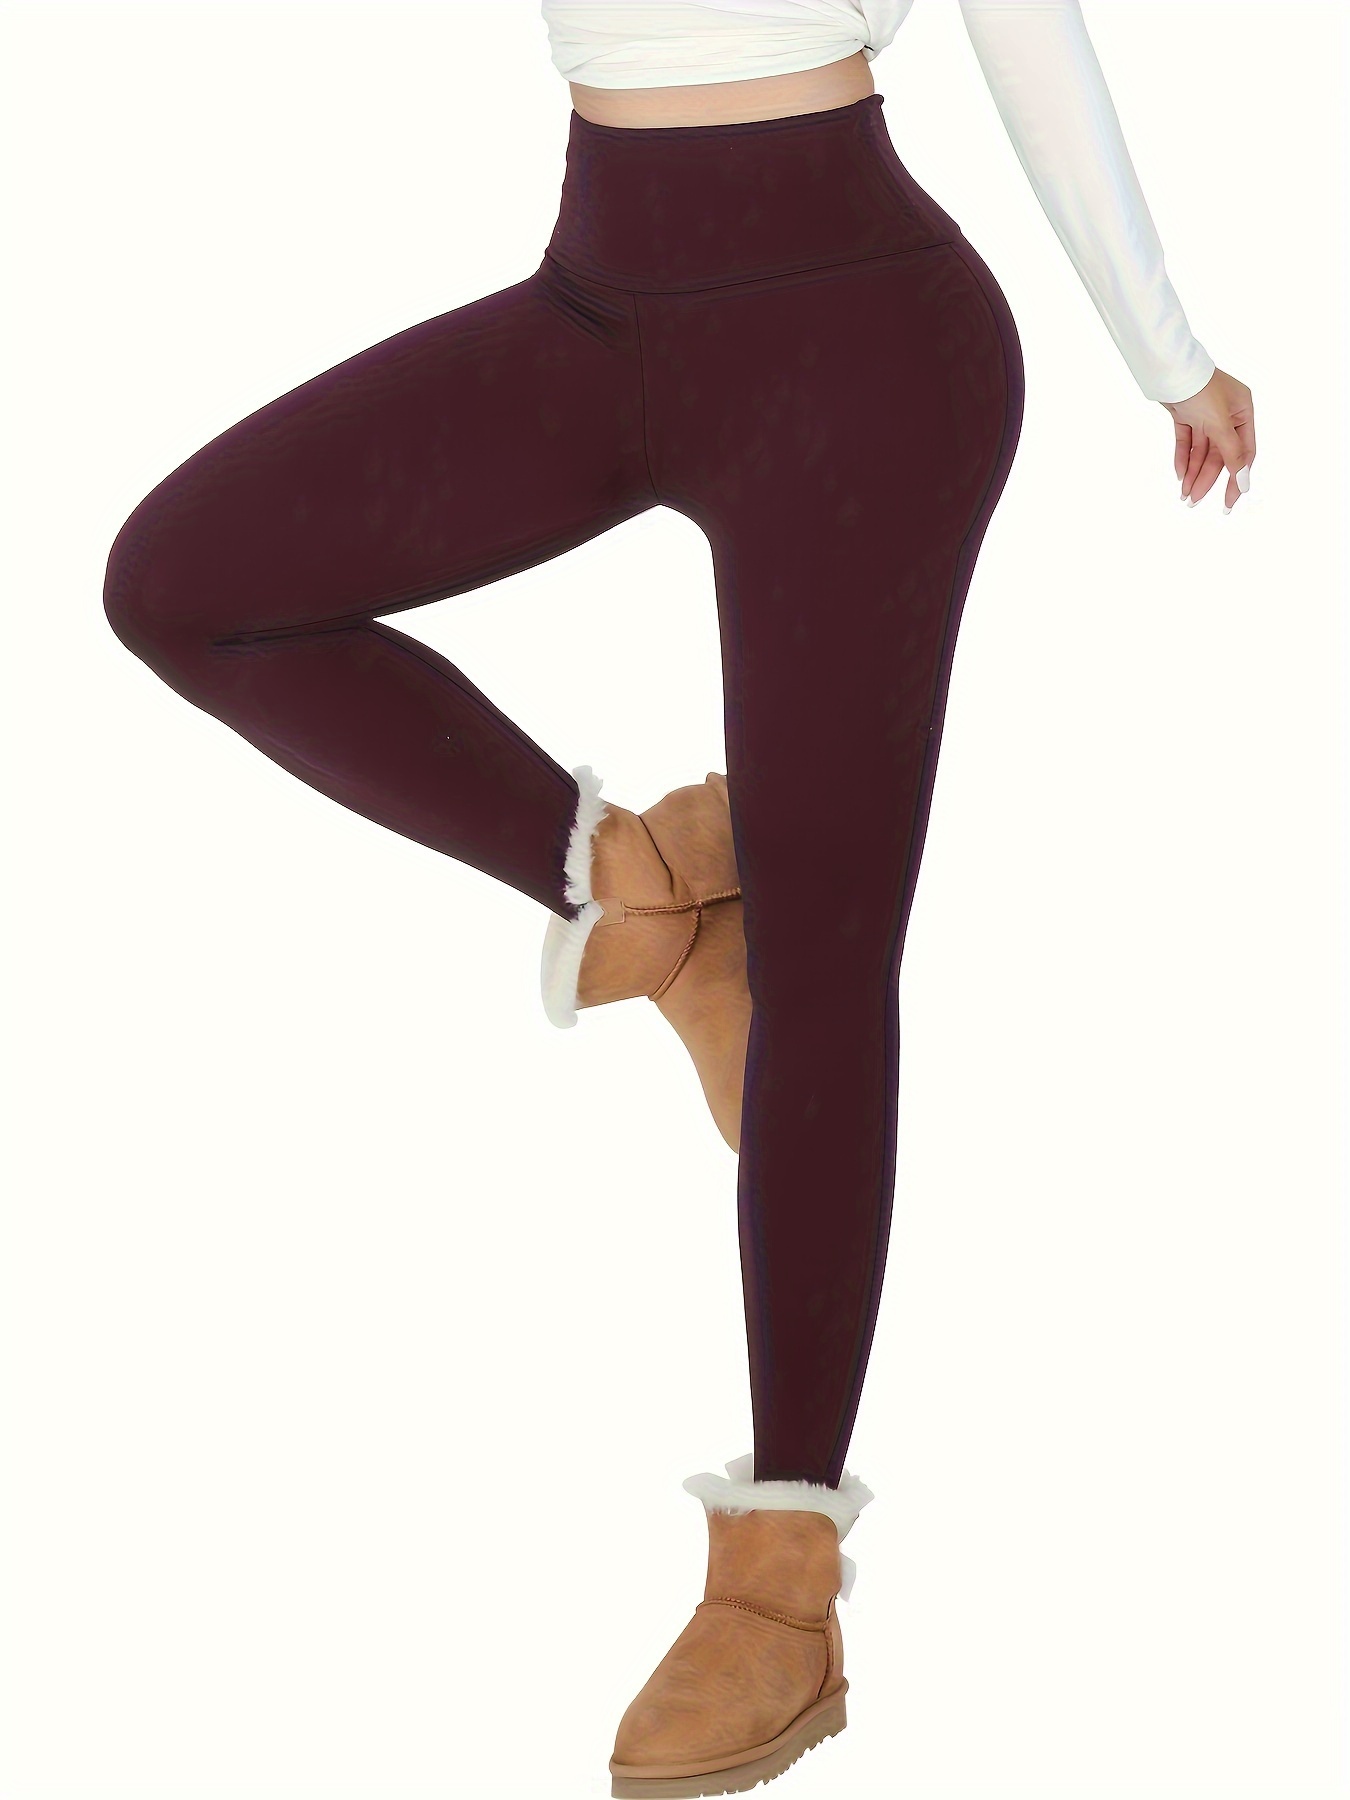 Stylish High Waisted Thermal Leggings for Women Chocolate BOGOF